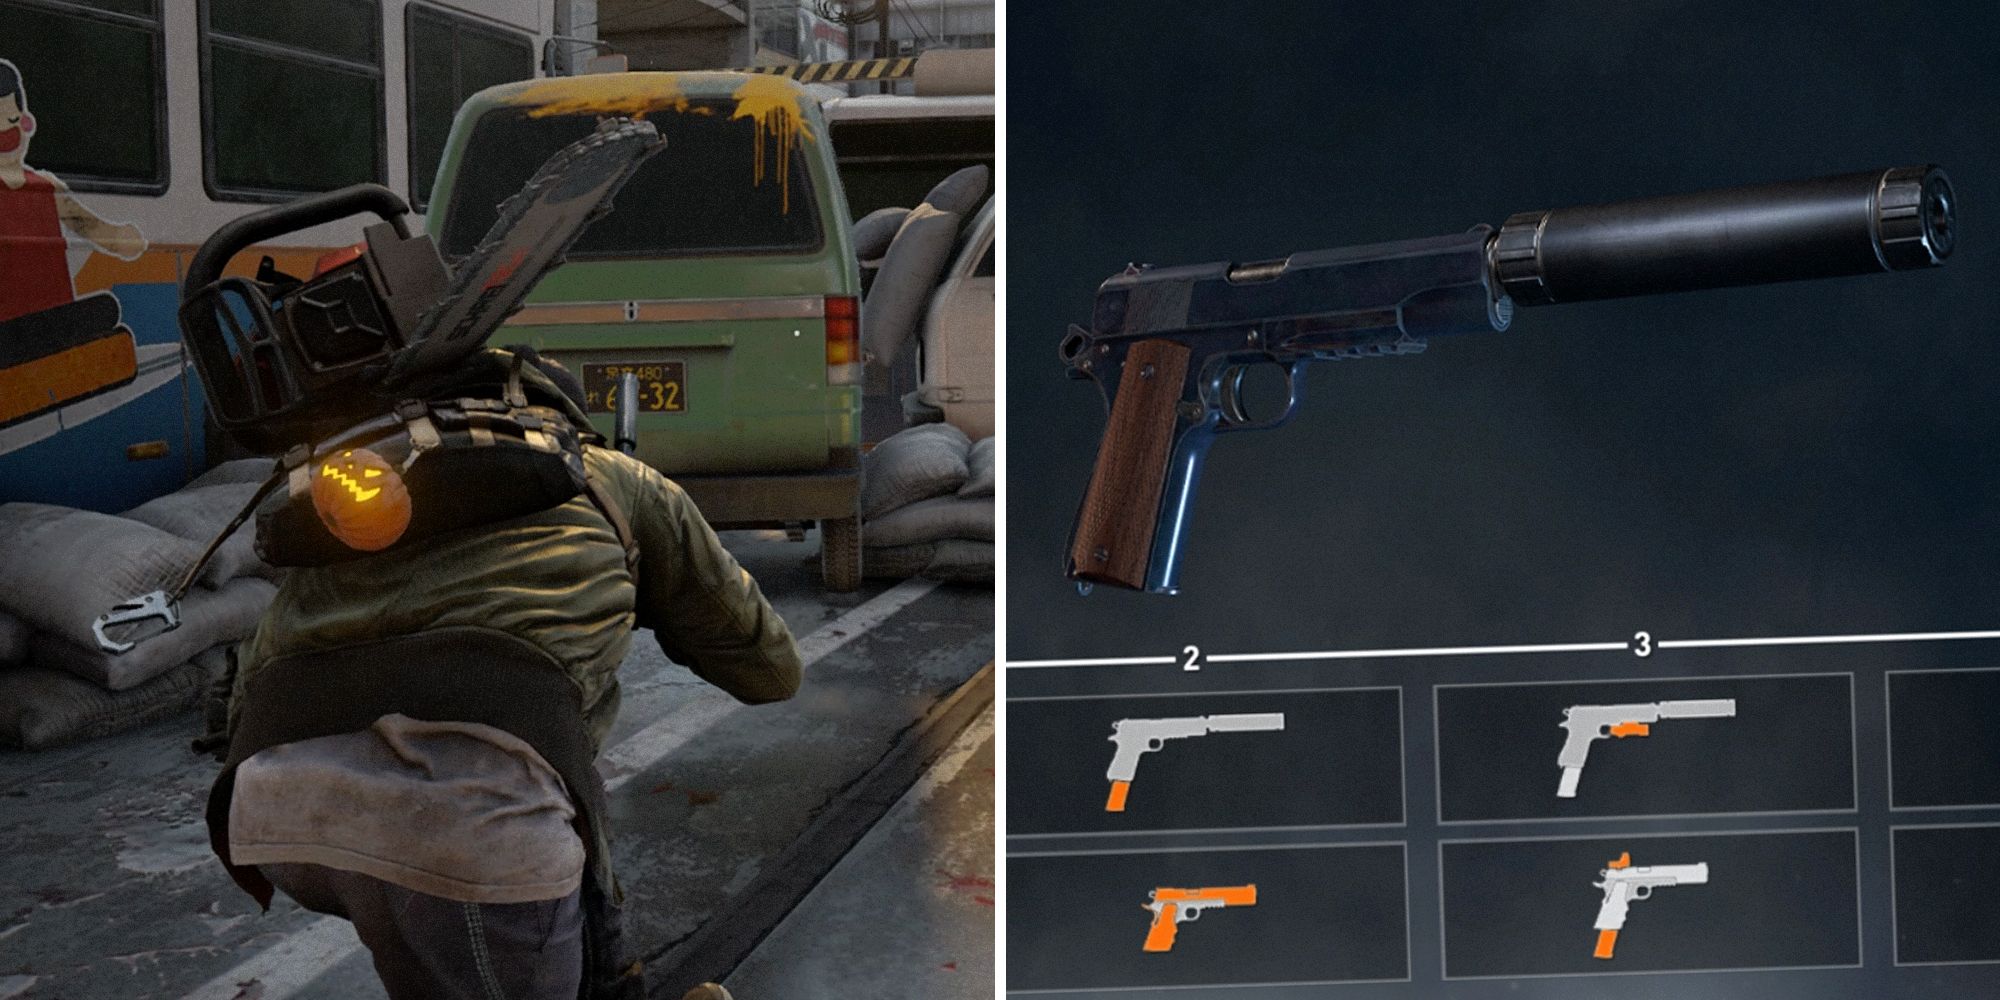 World War Z. Split image. Character crouching on the left with a chainsaw on his back, photo of the pistol on the right.